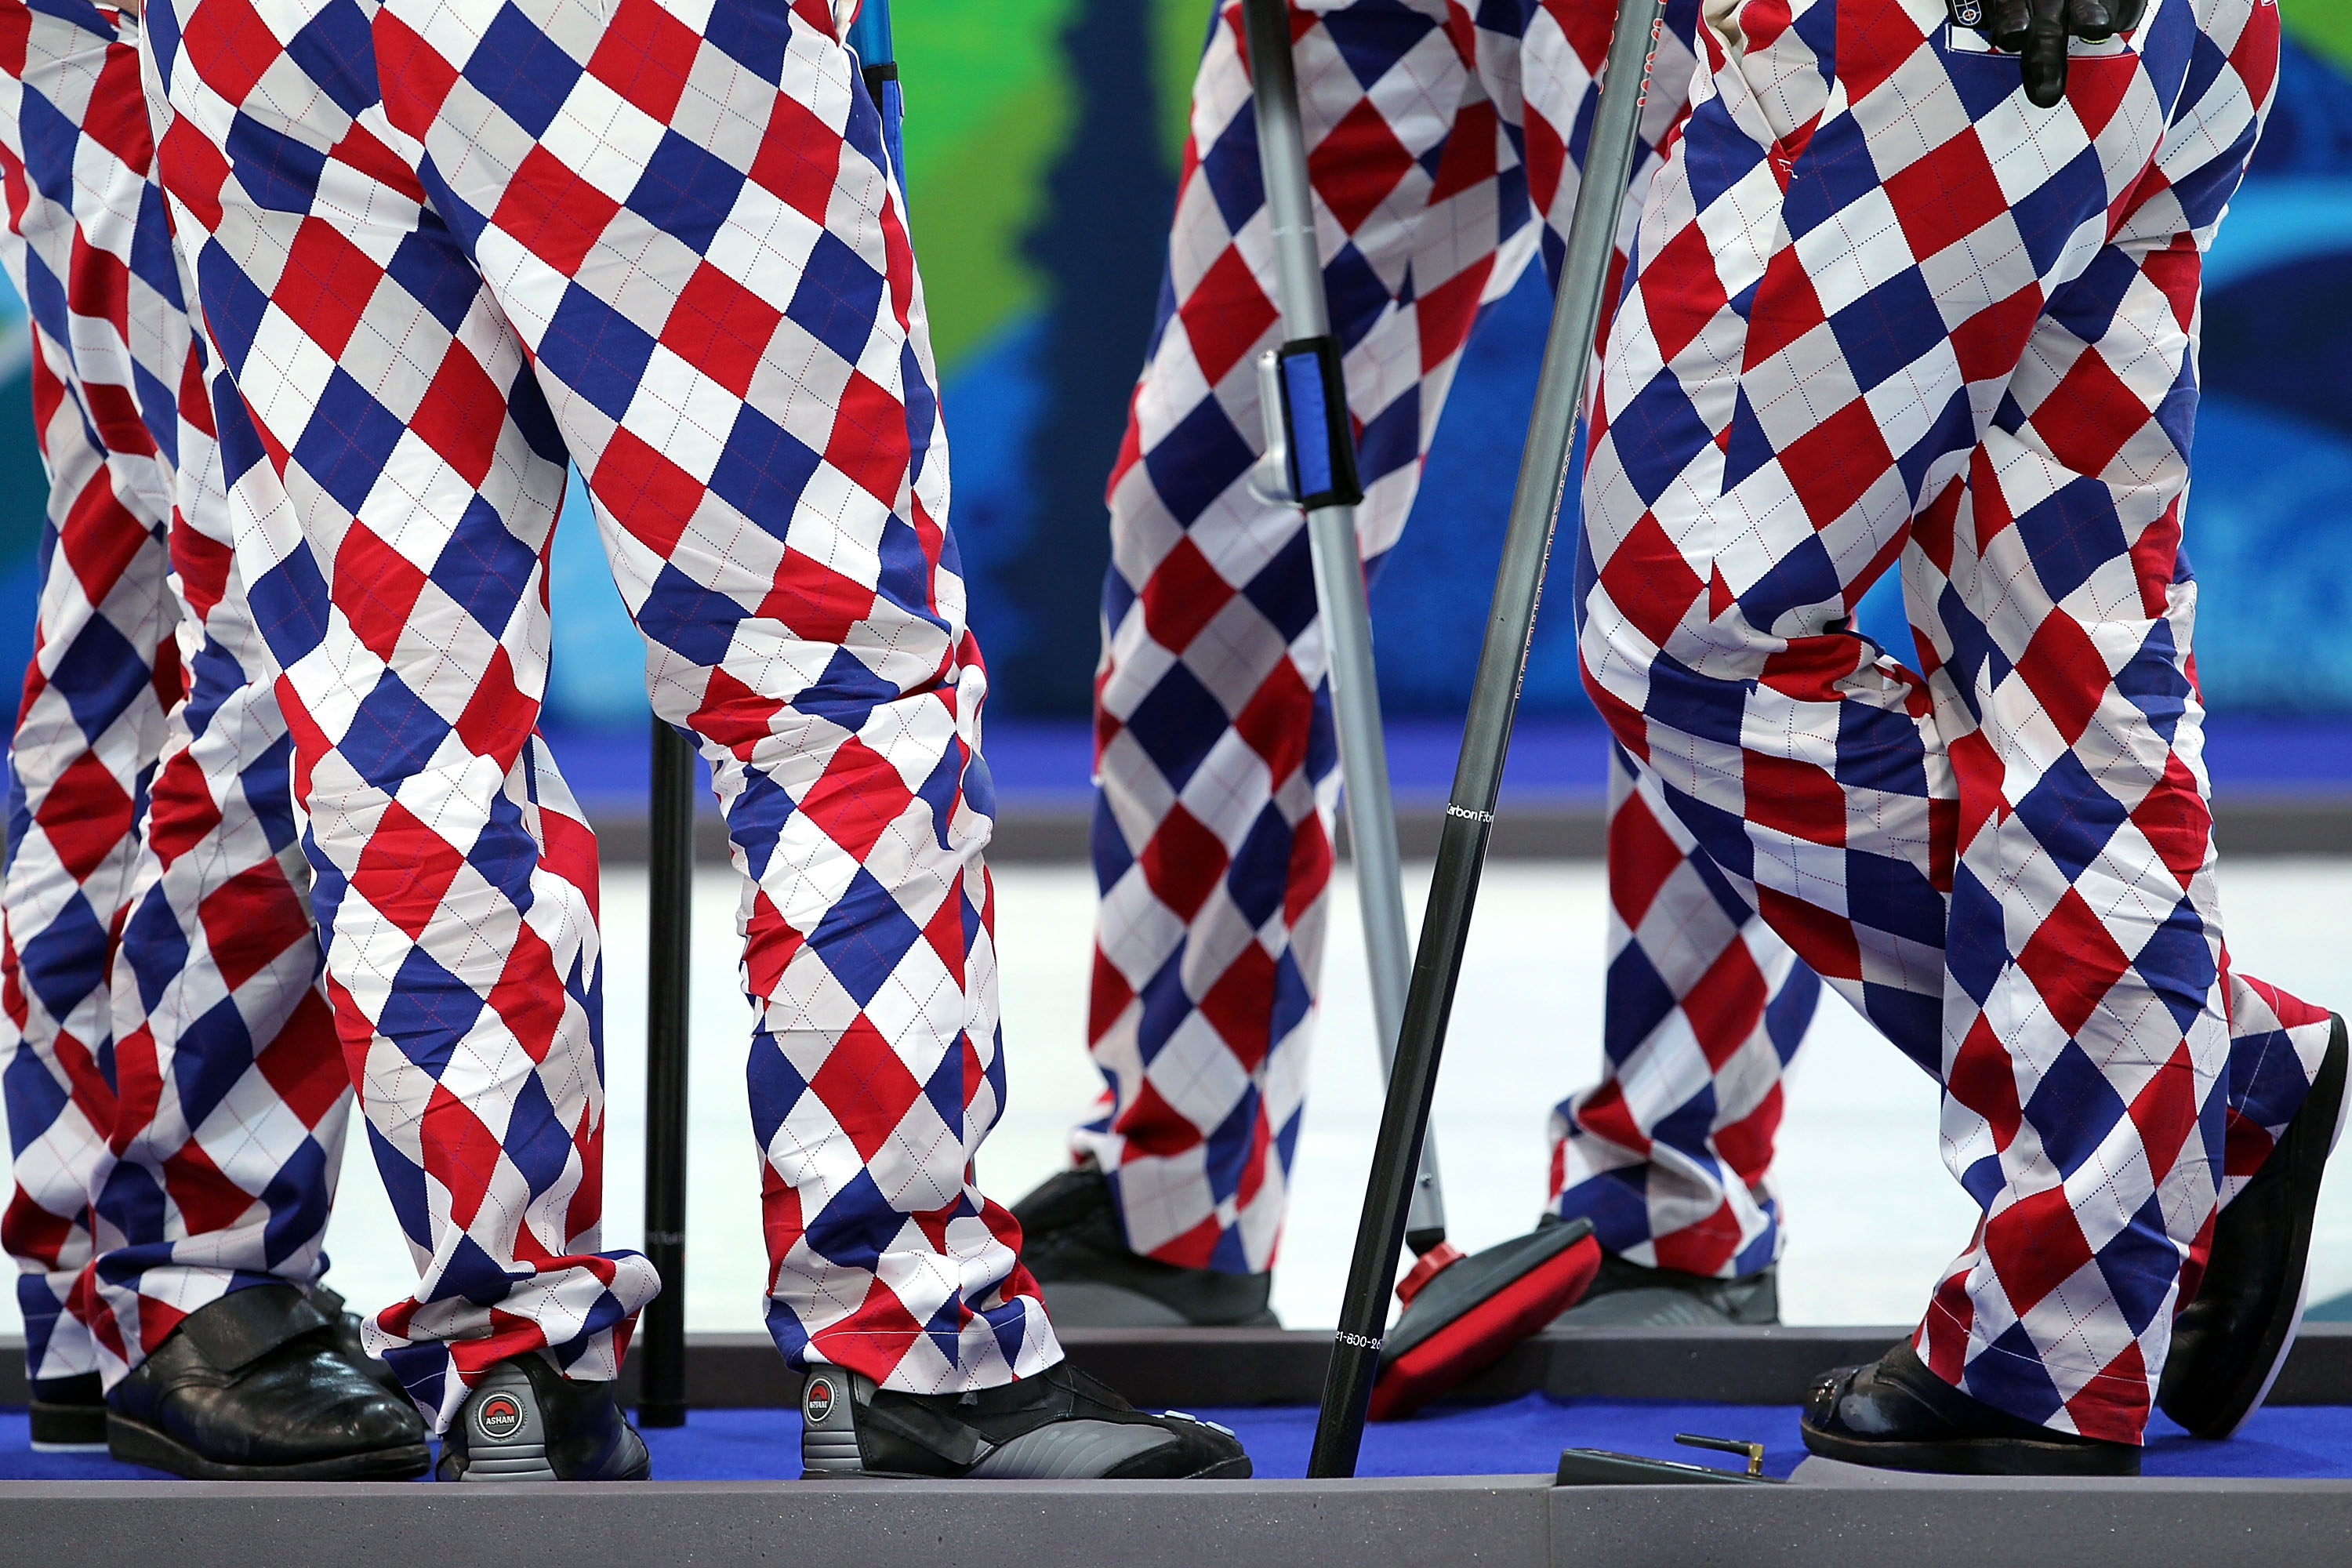 Norway curling team puts on pants without using hands